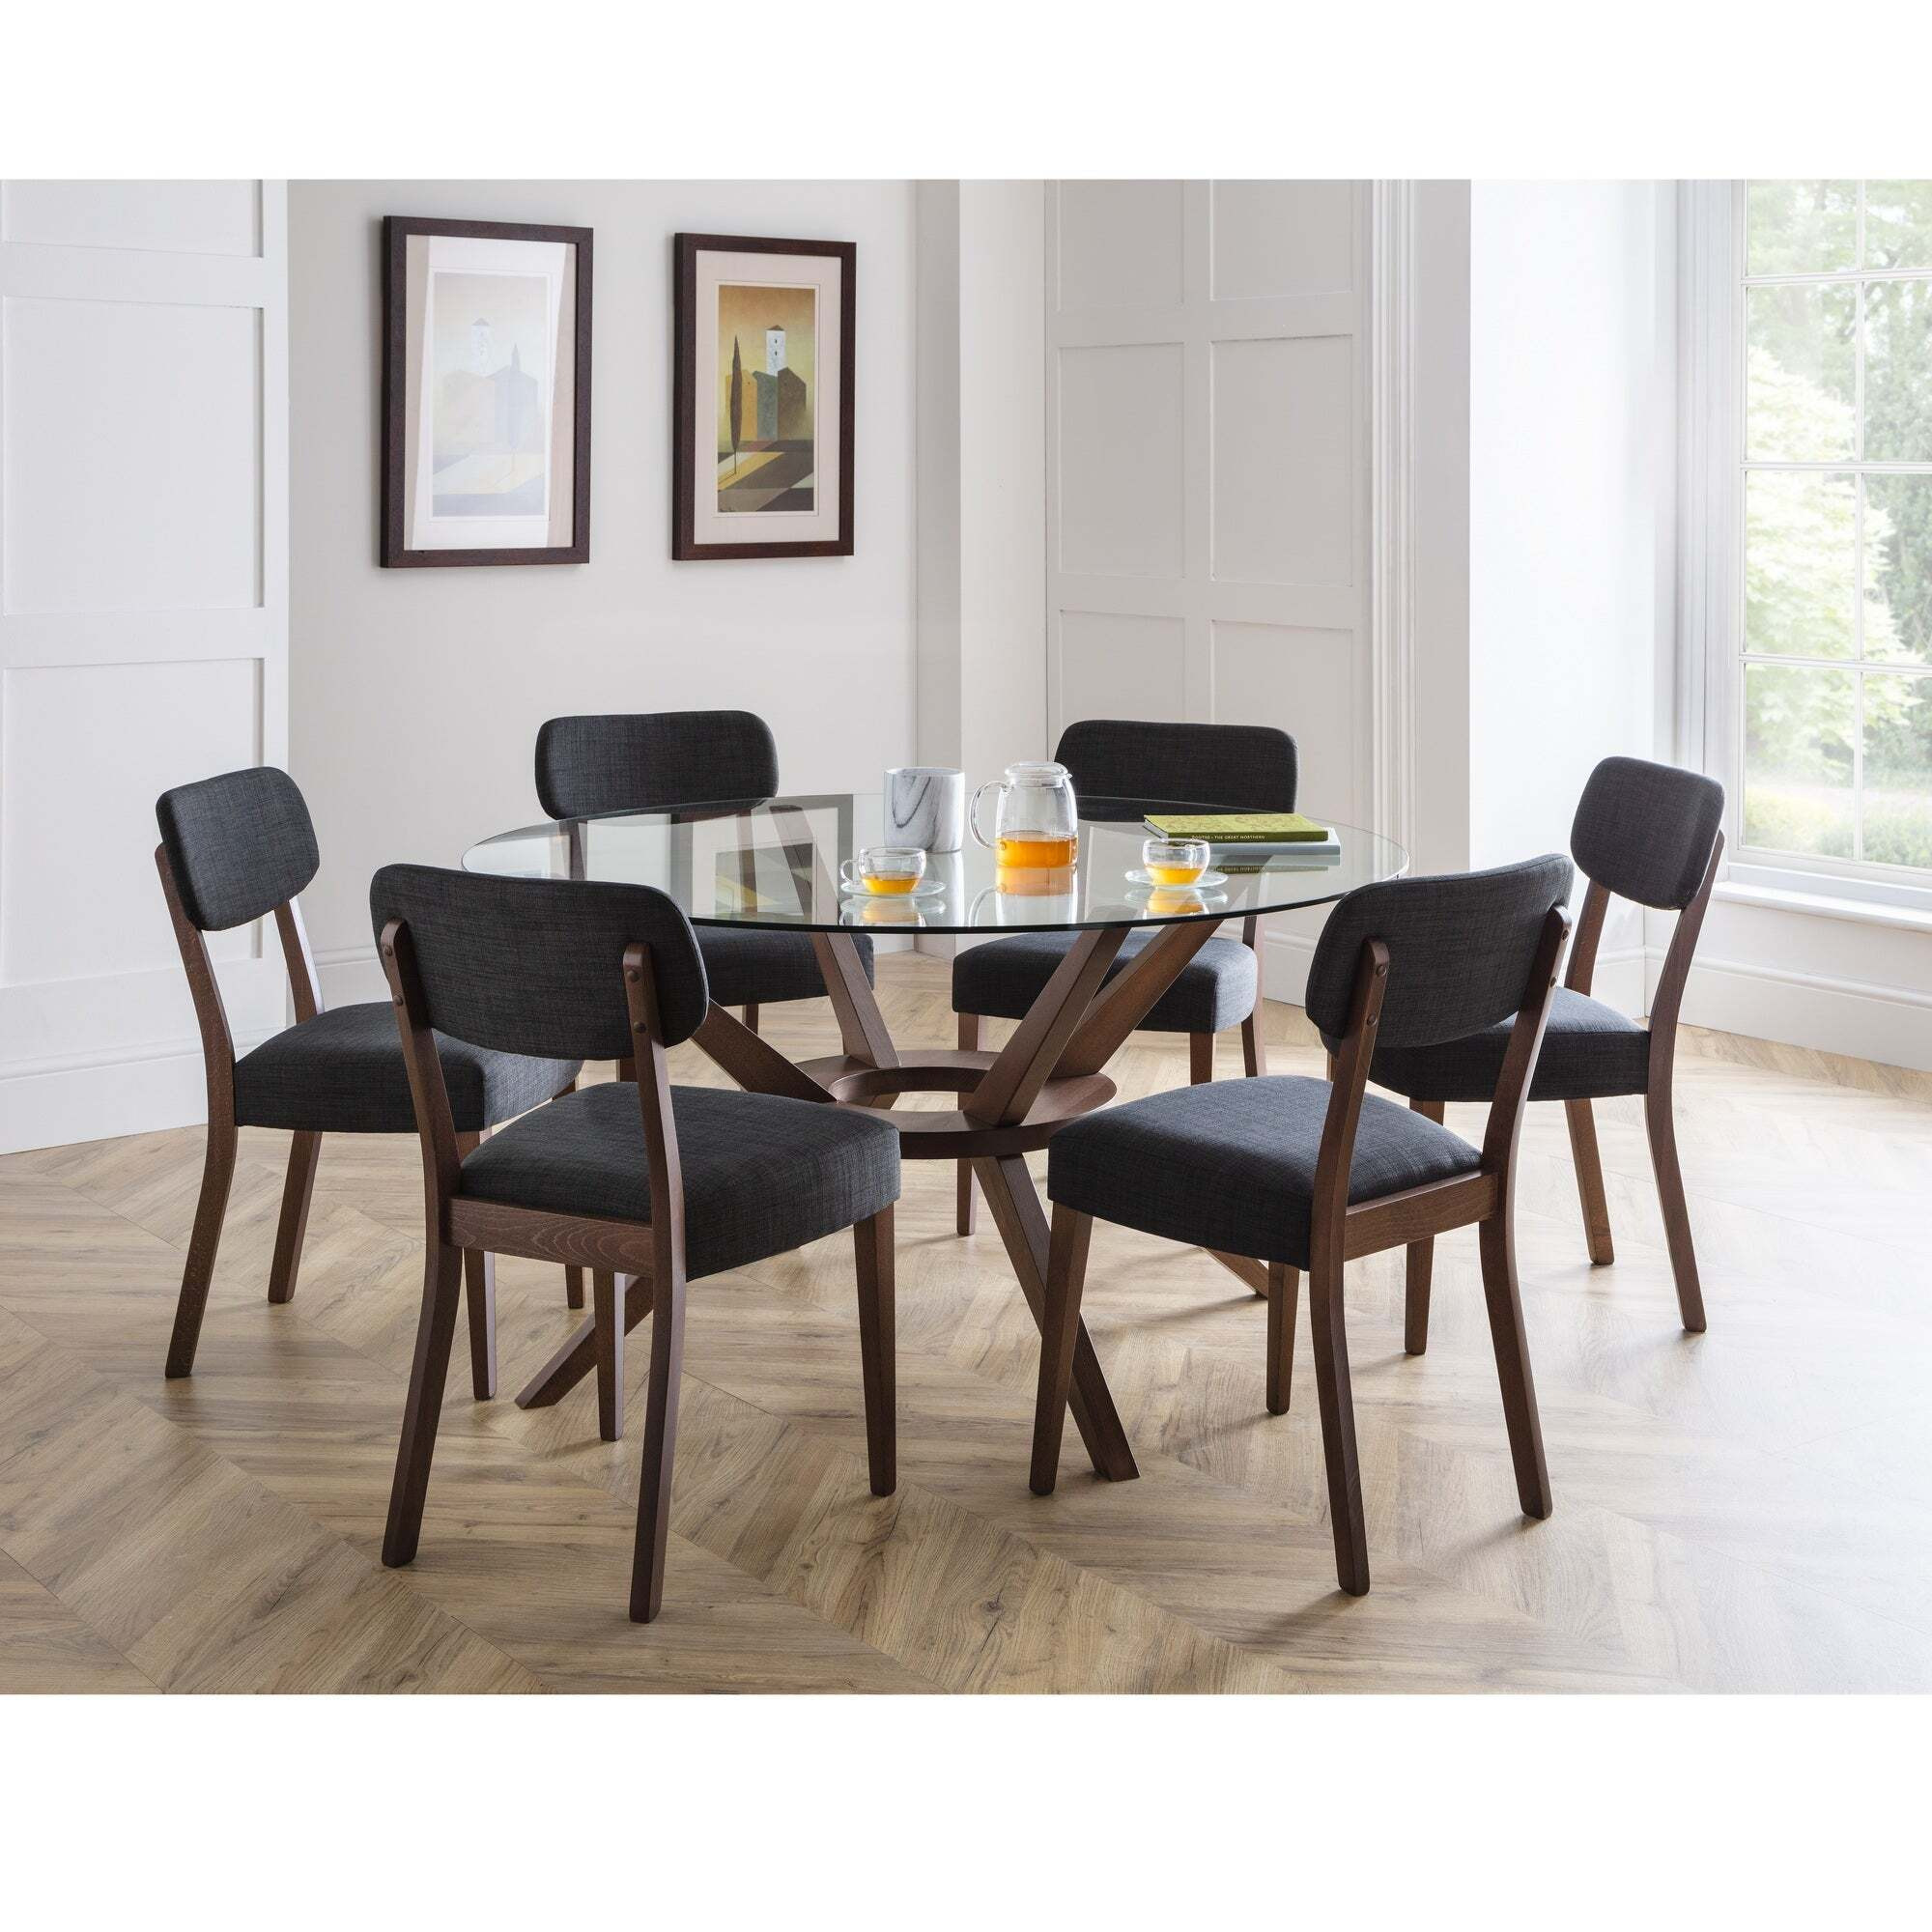 Chelsea Round Glass Top Dining Table with 6 Farringdon Chairs Brown